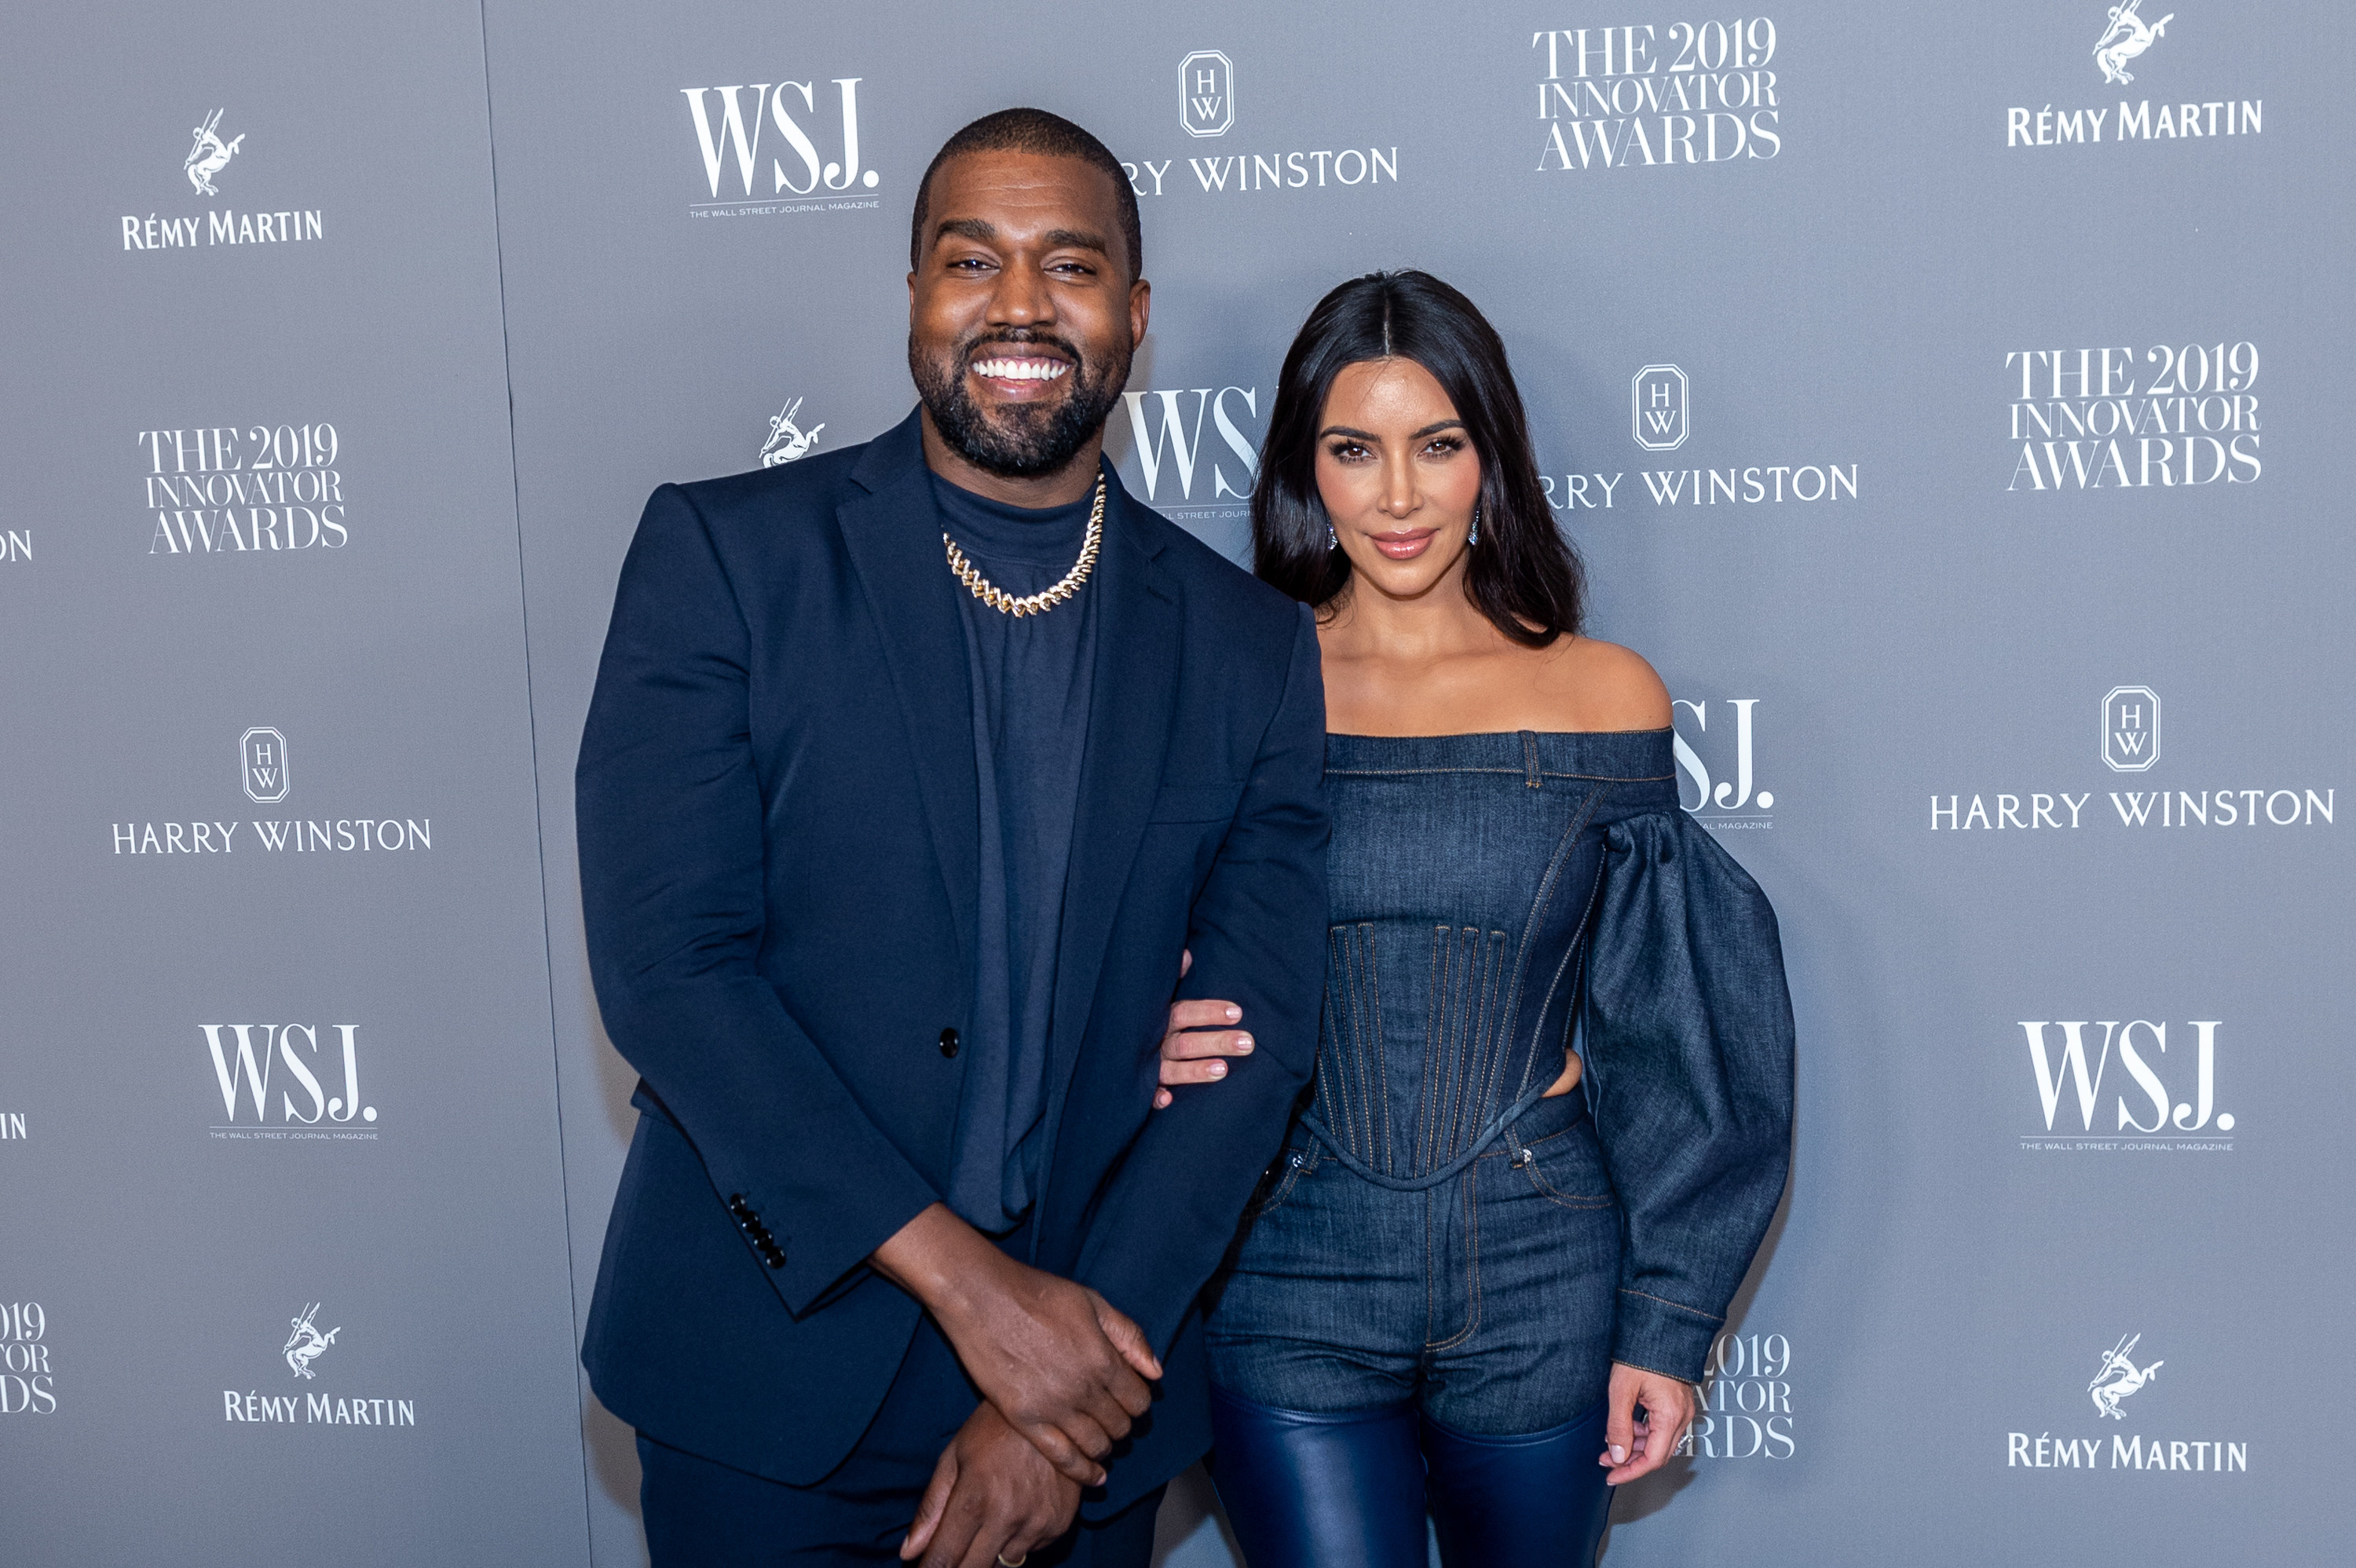 Kanye and Kim pose for photographers on the red carpet